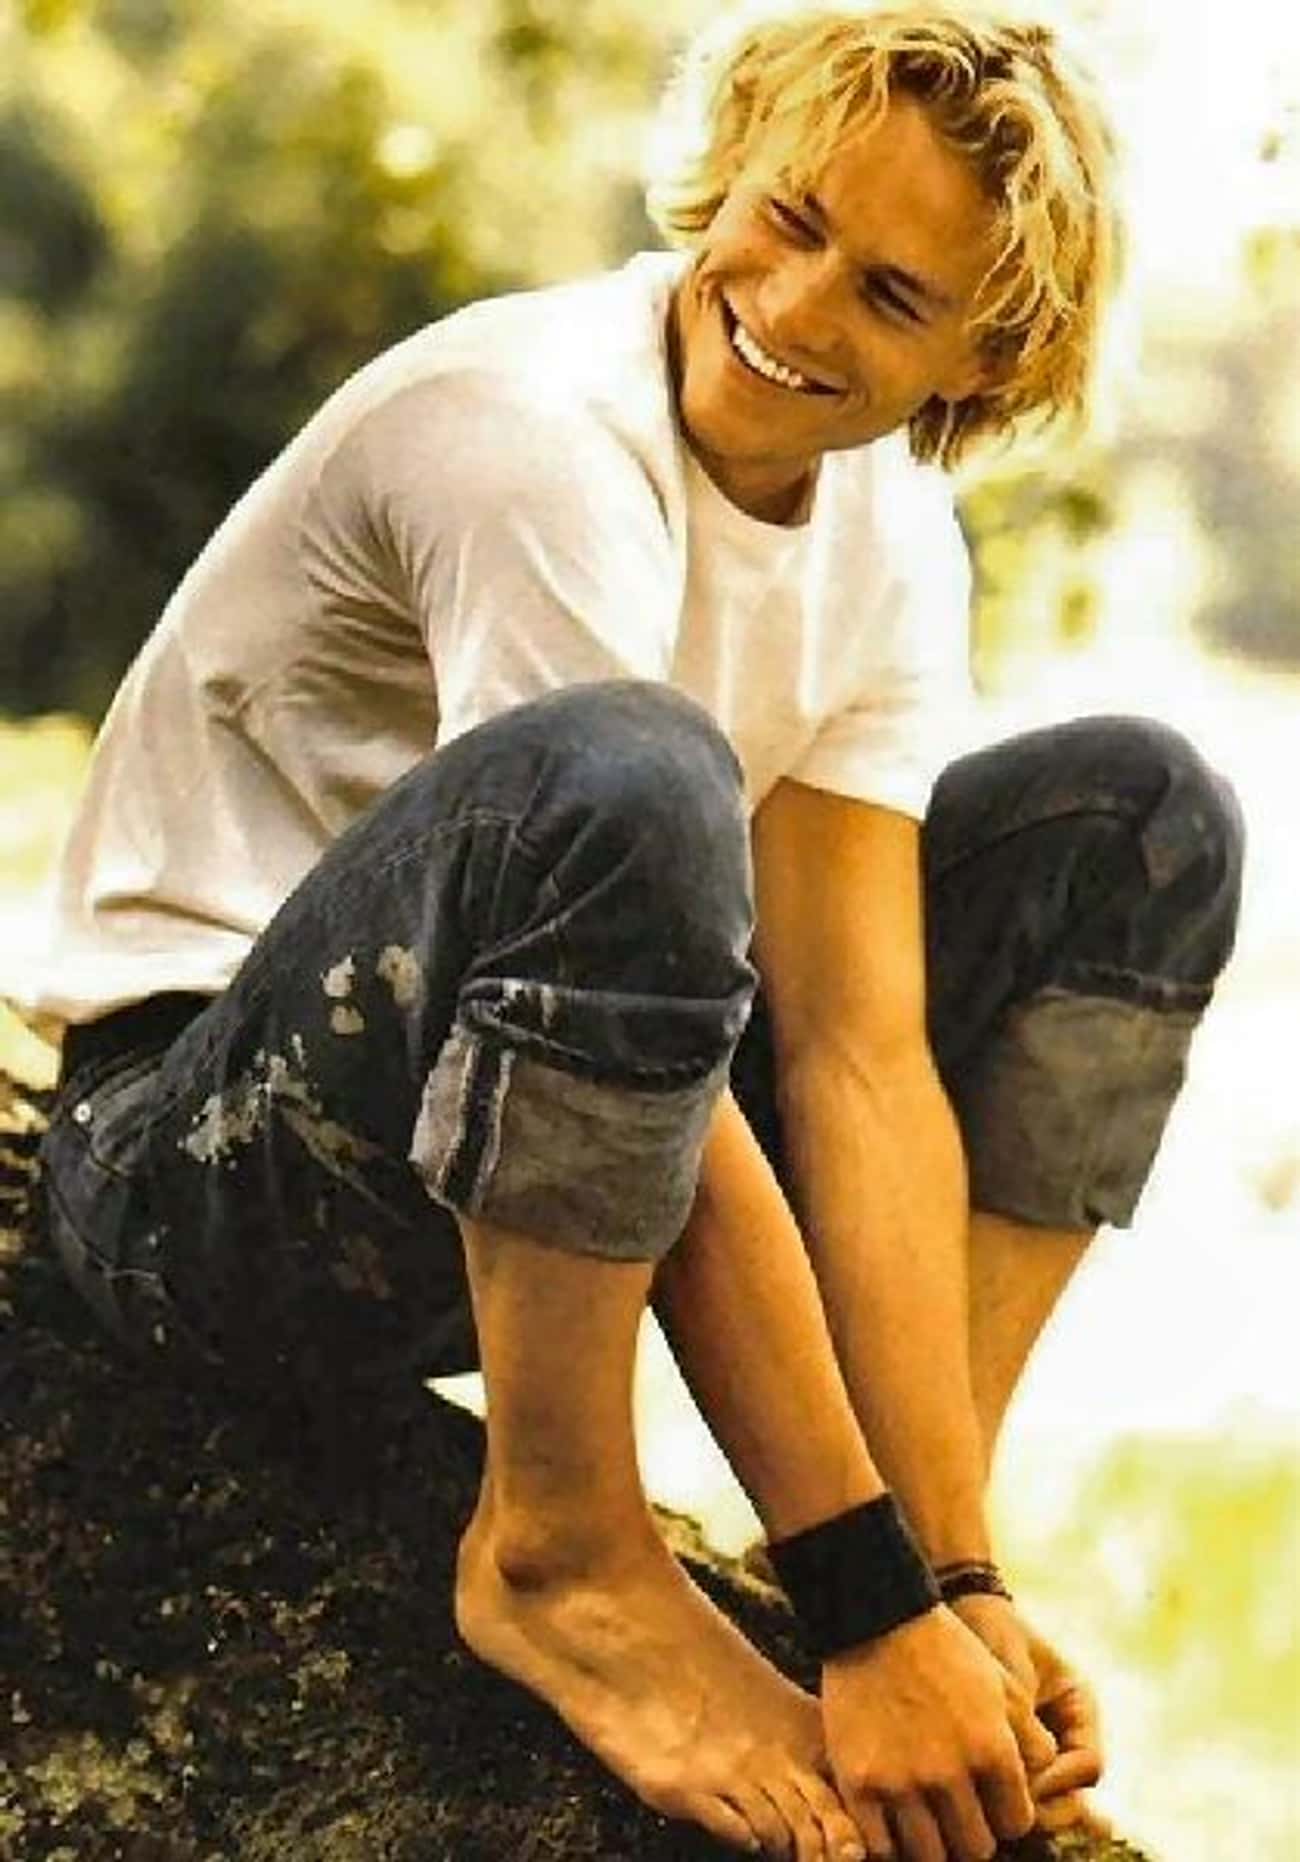 Young Heath Ledger in White T-Shirt and Blue Jeans